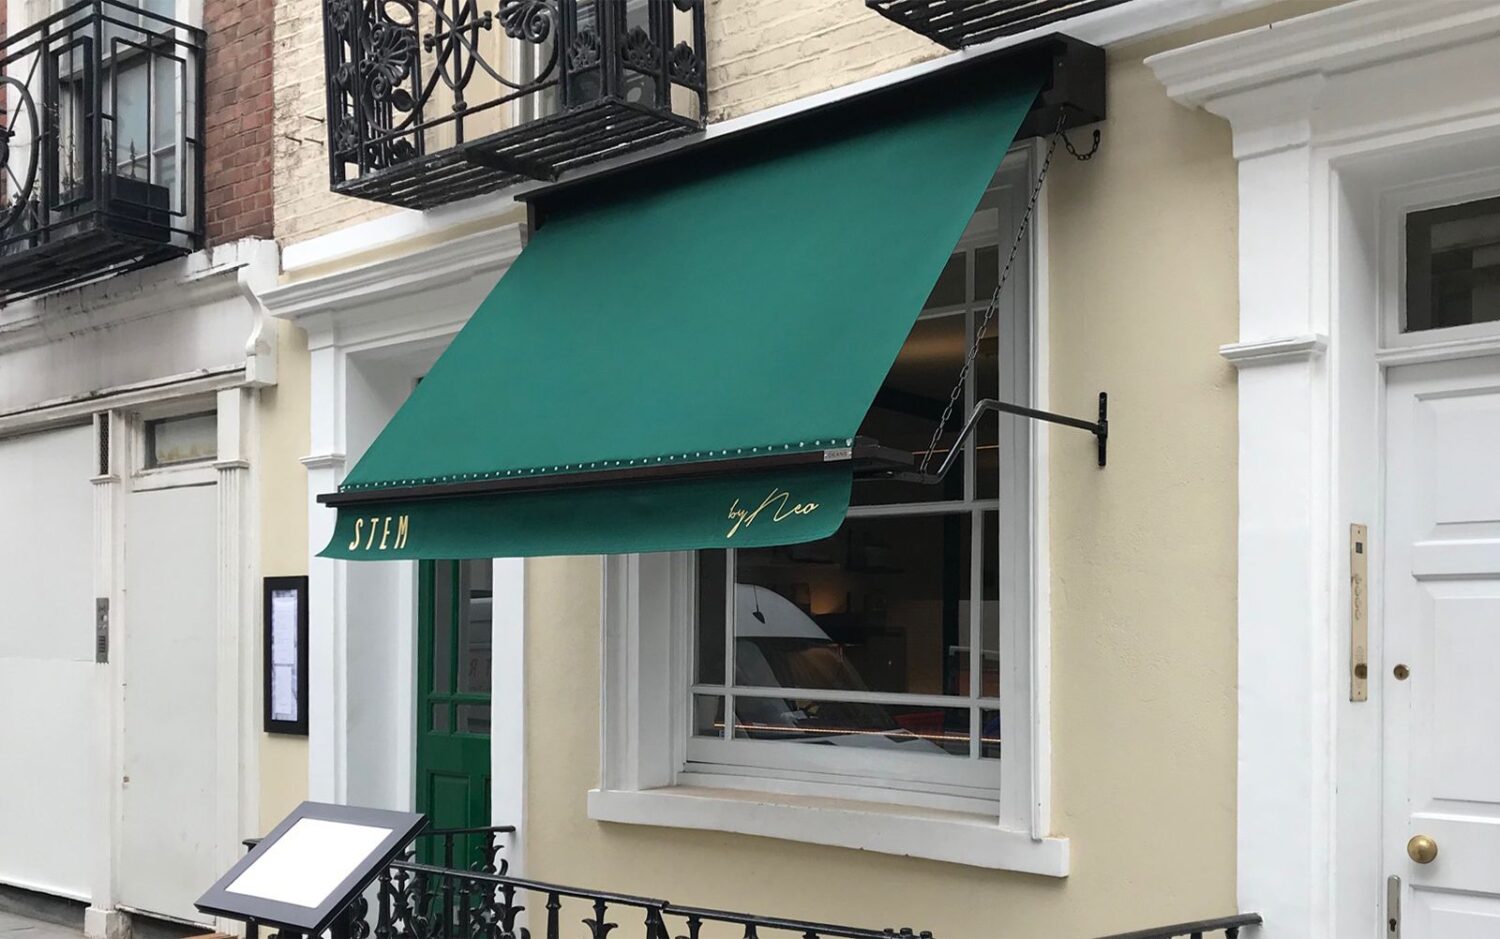 Gold Leaf Awnings